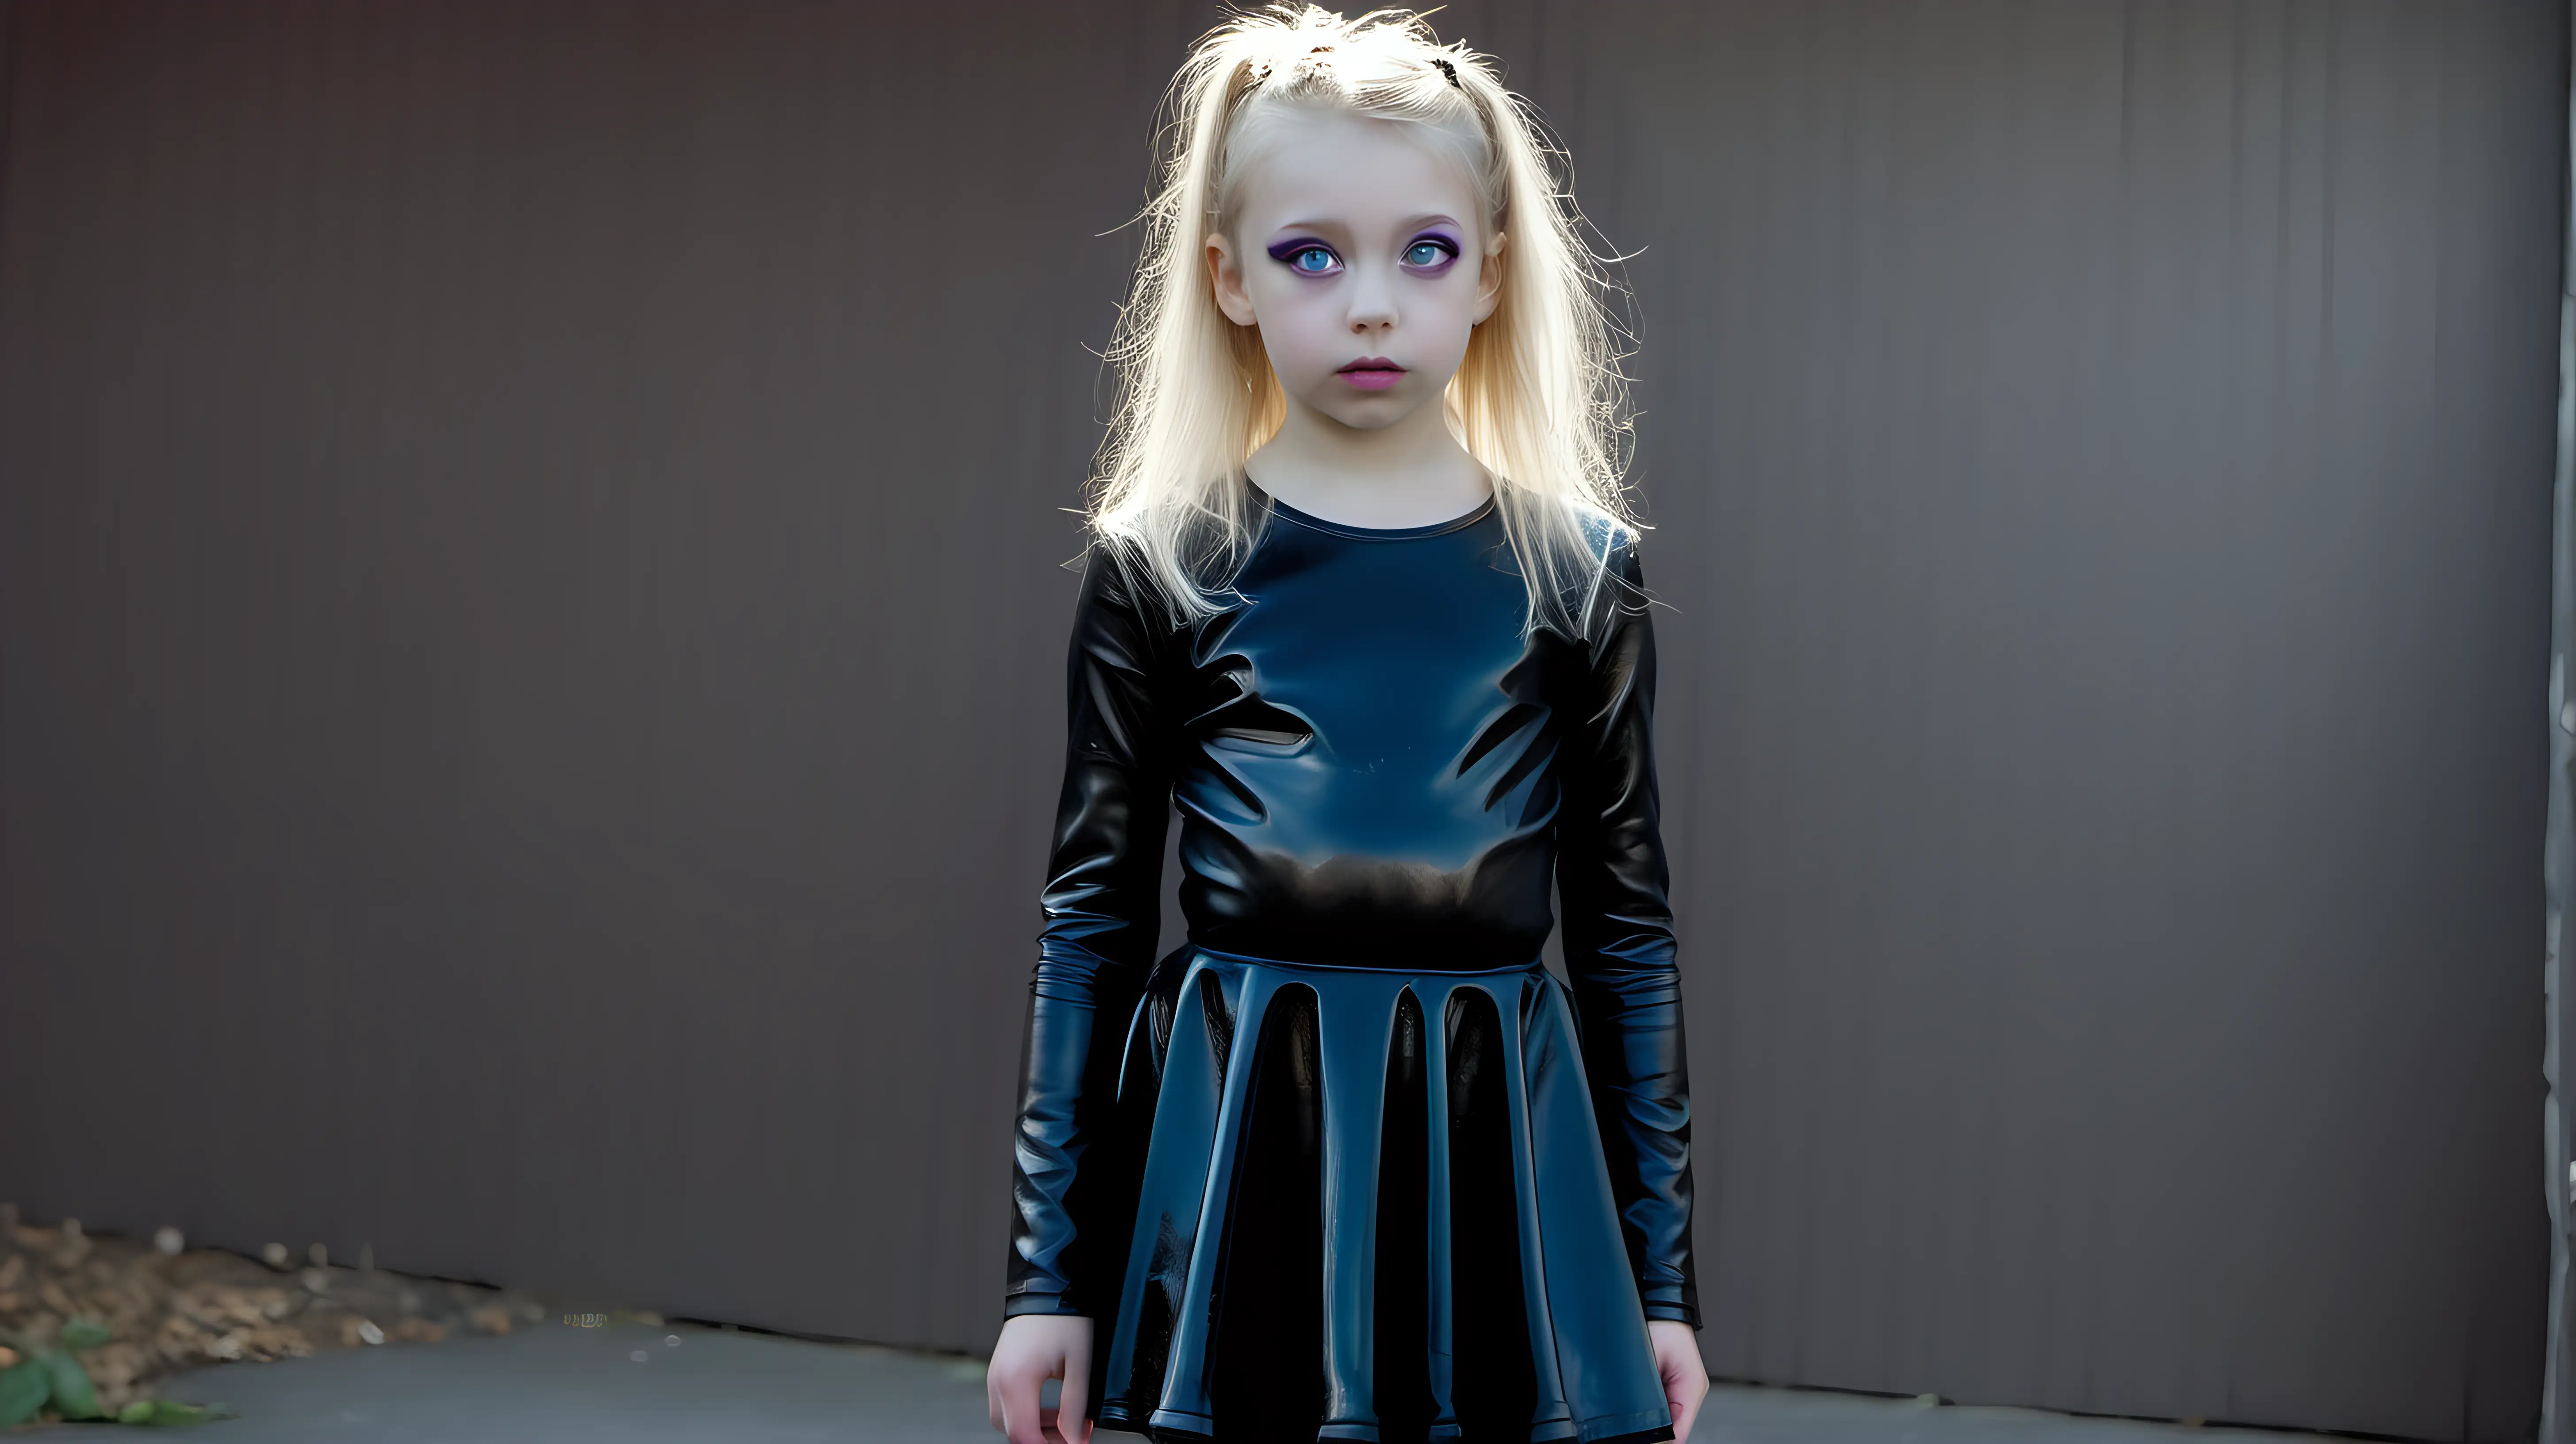 Gothic Little Girl in Latex Dress with Mom in Leather Street Portrait Shot